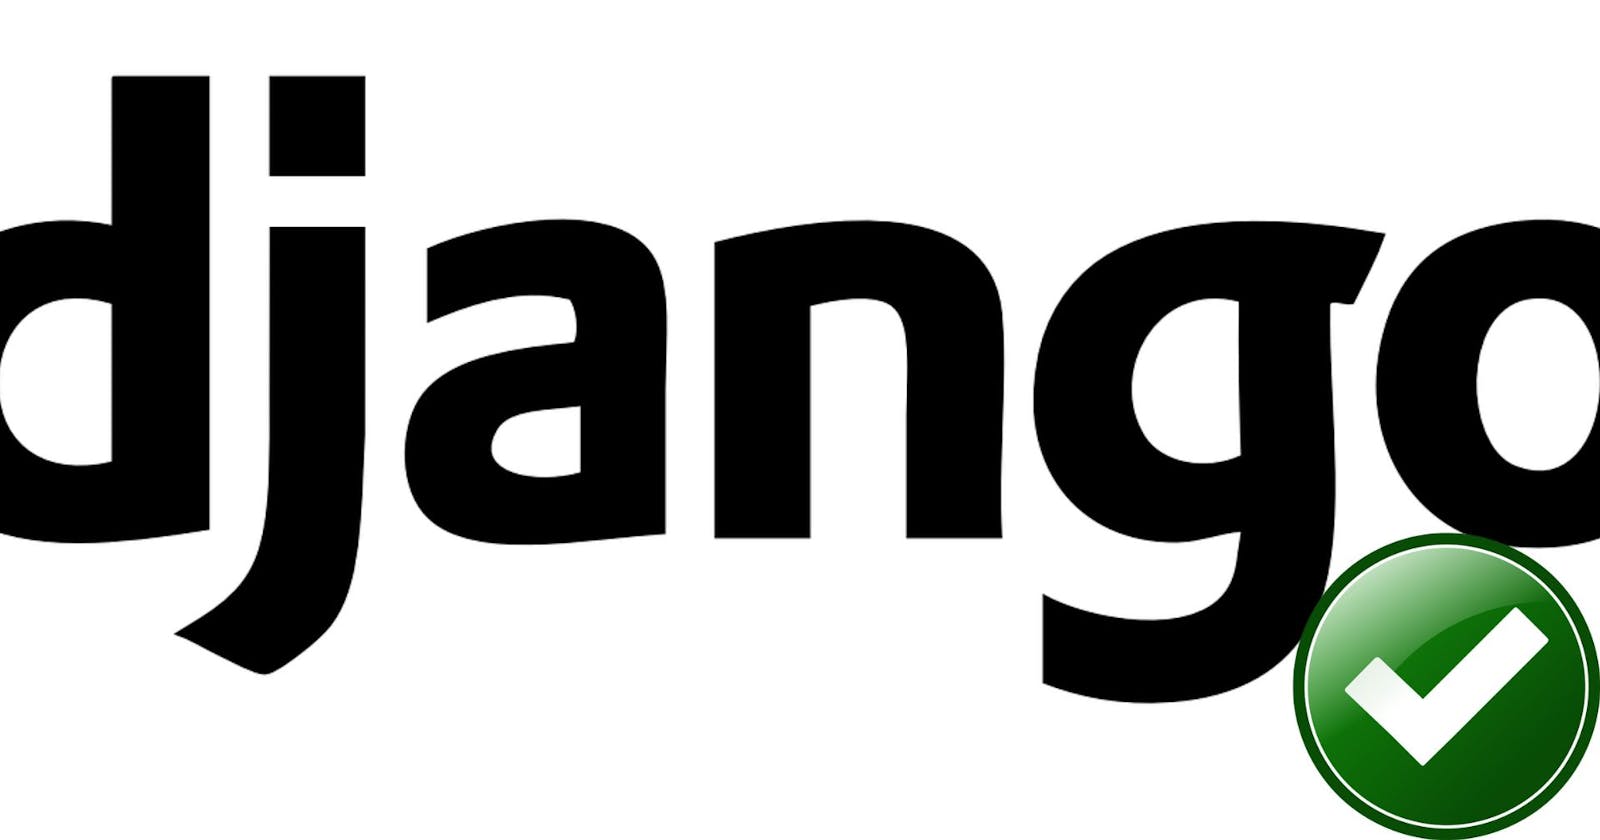 Setting up your first Django project